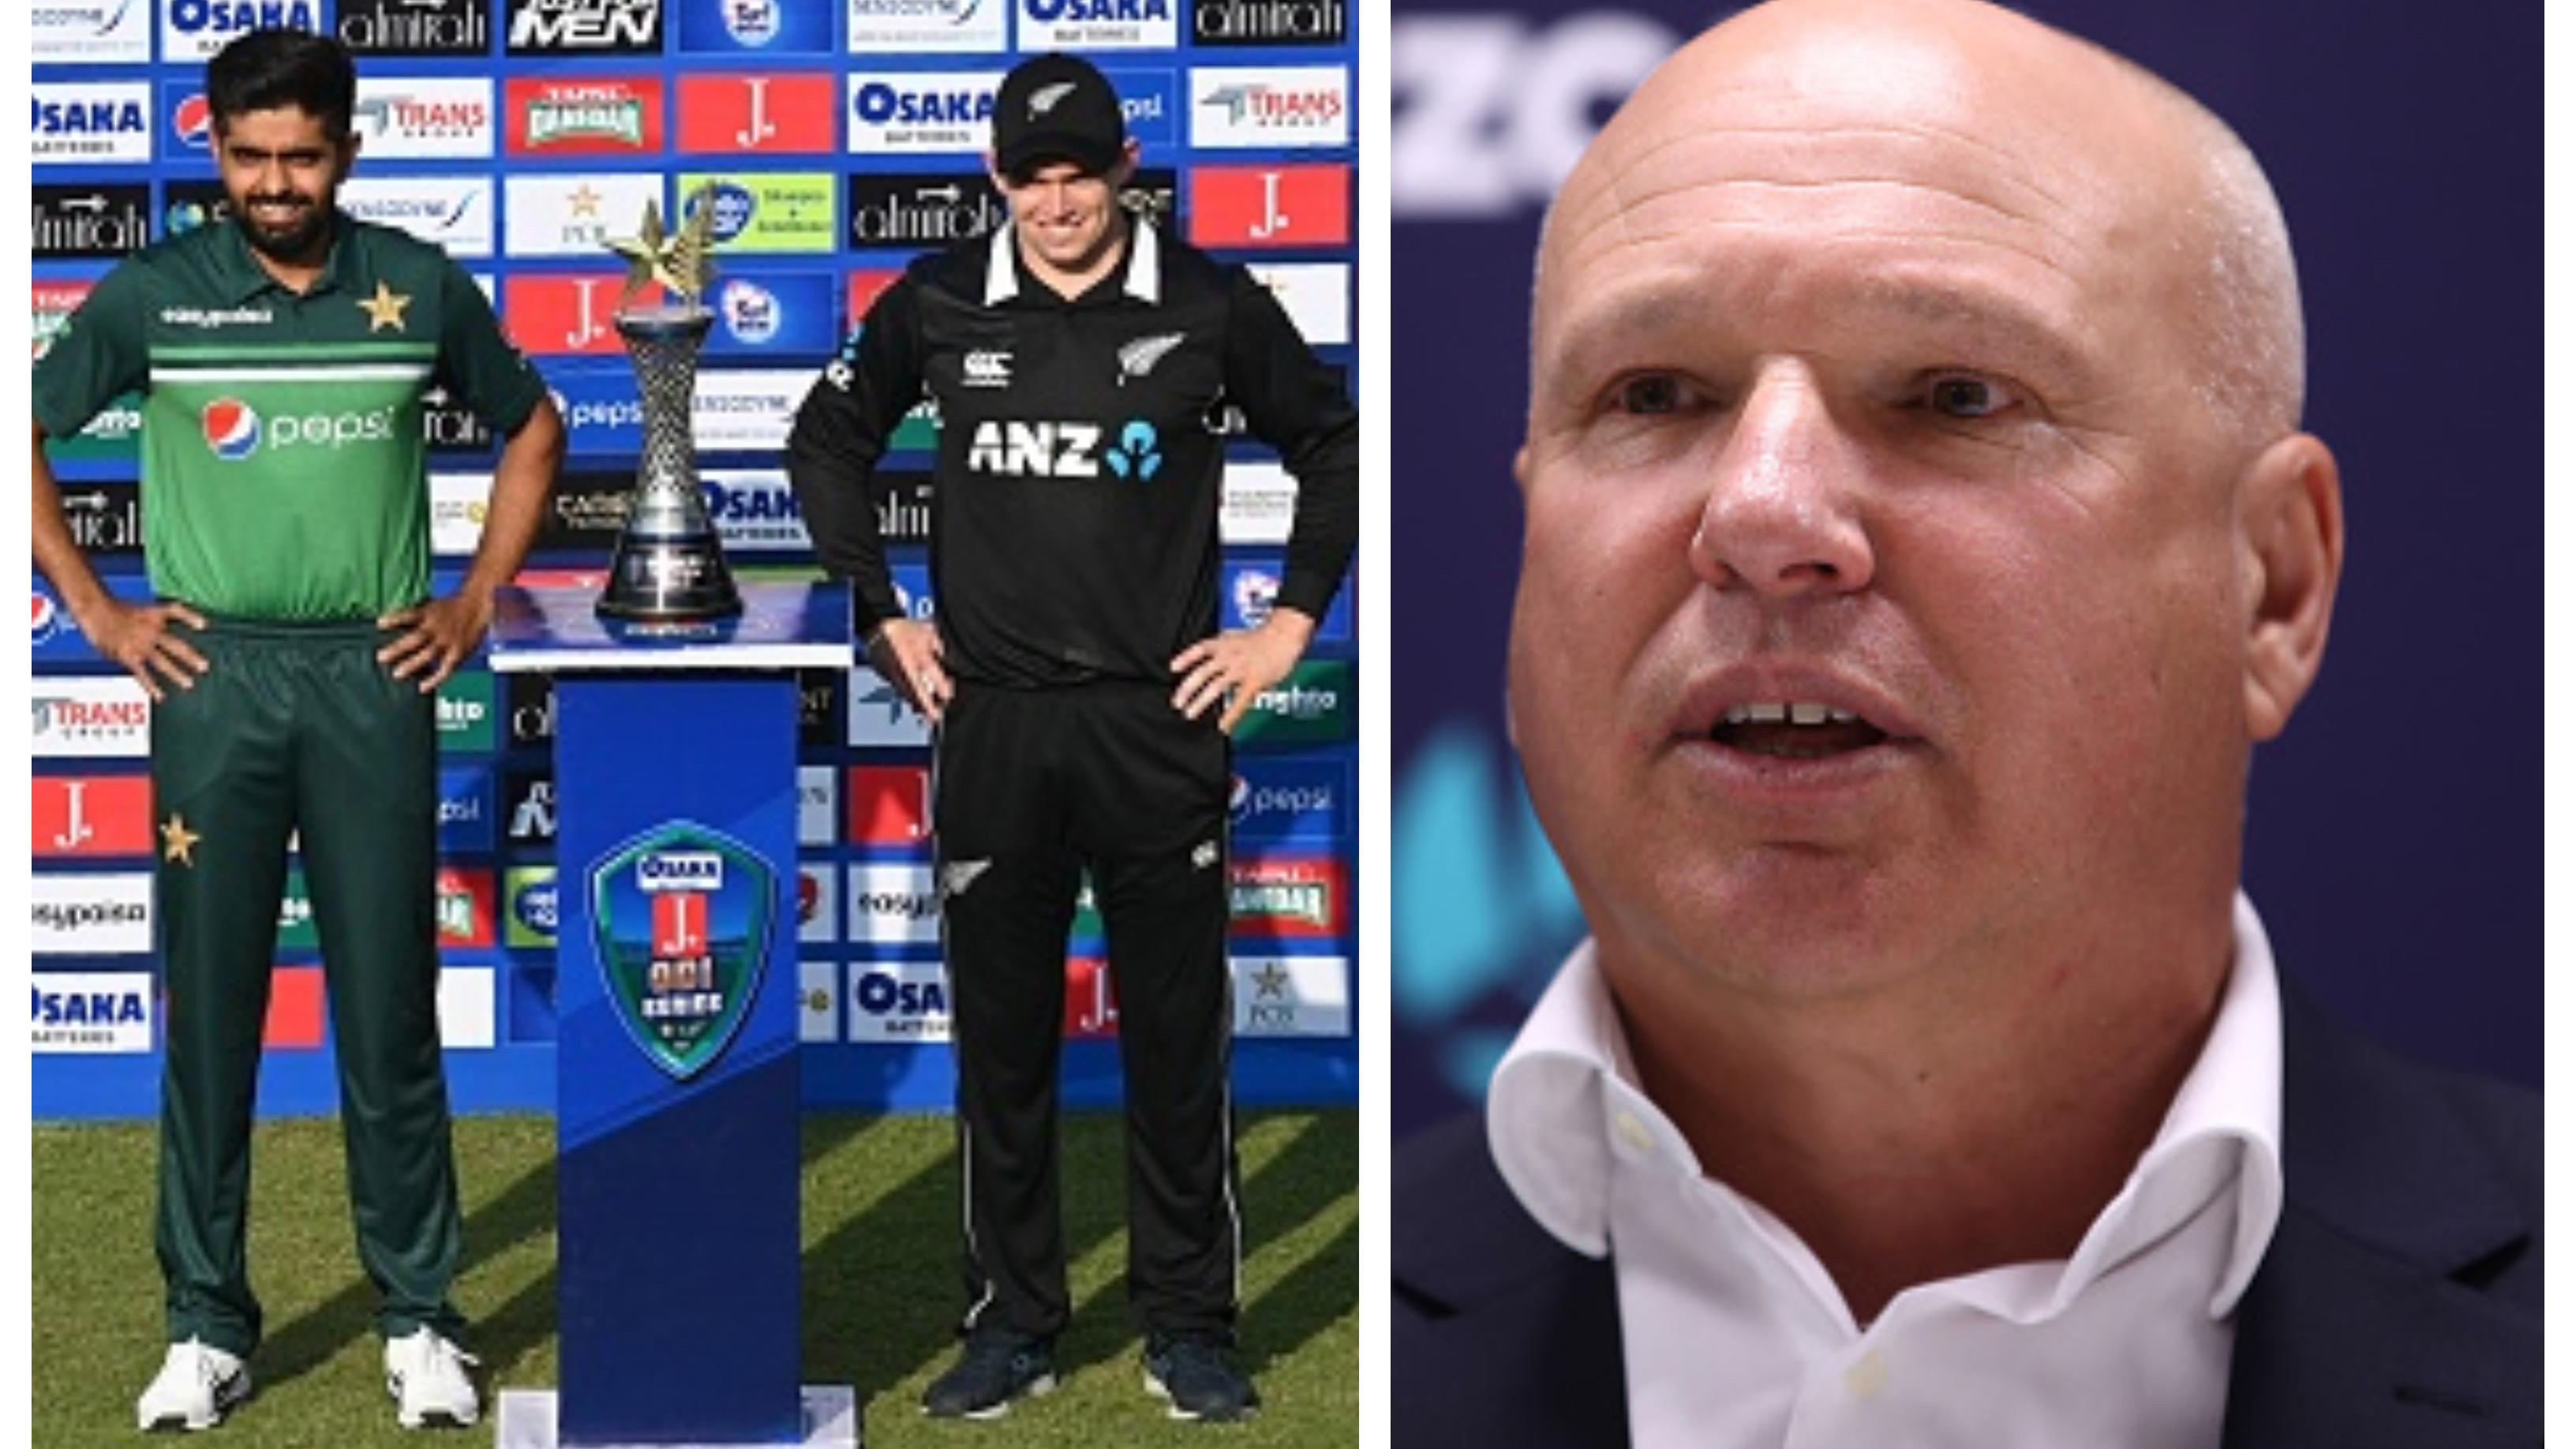 “I'm sure we'll find a window”, NZC CEO hopeful of completing abandoned white-ball series against Pakistan